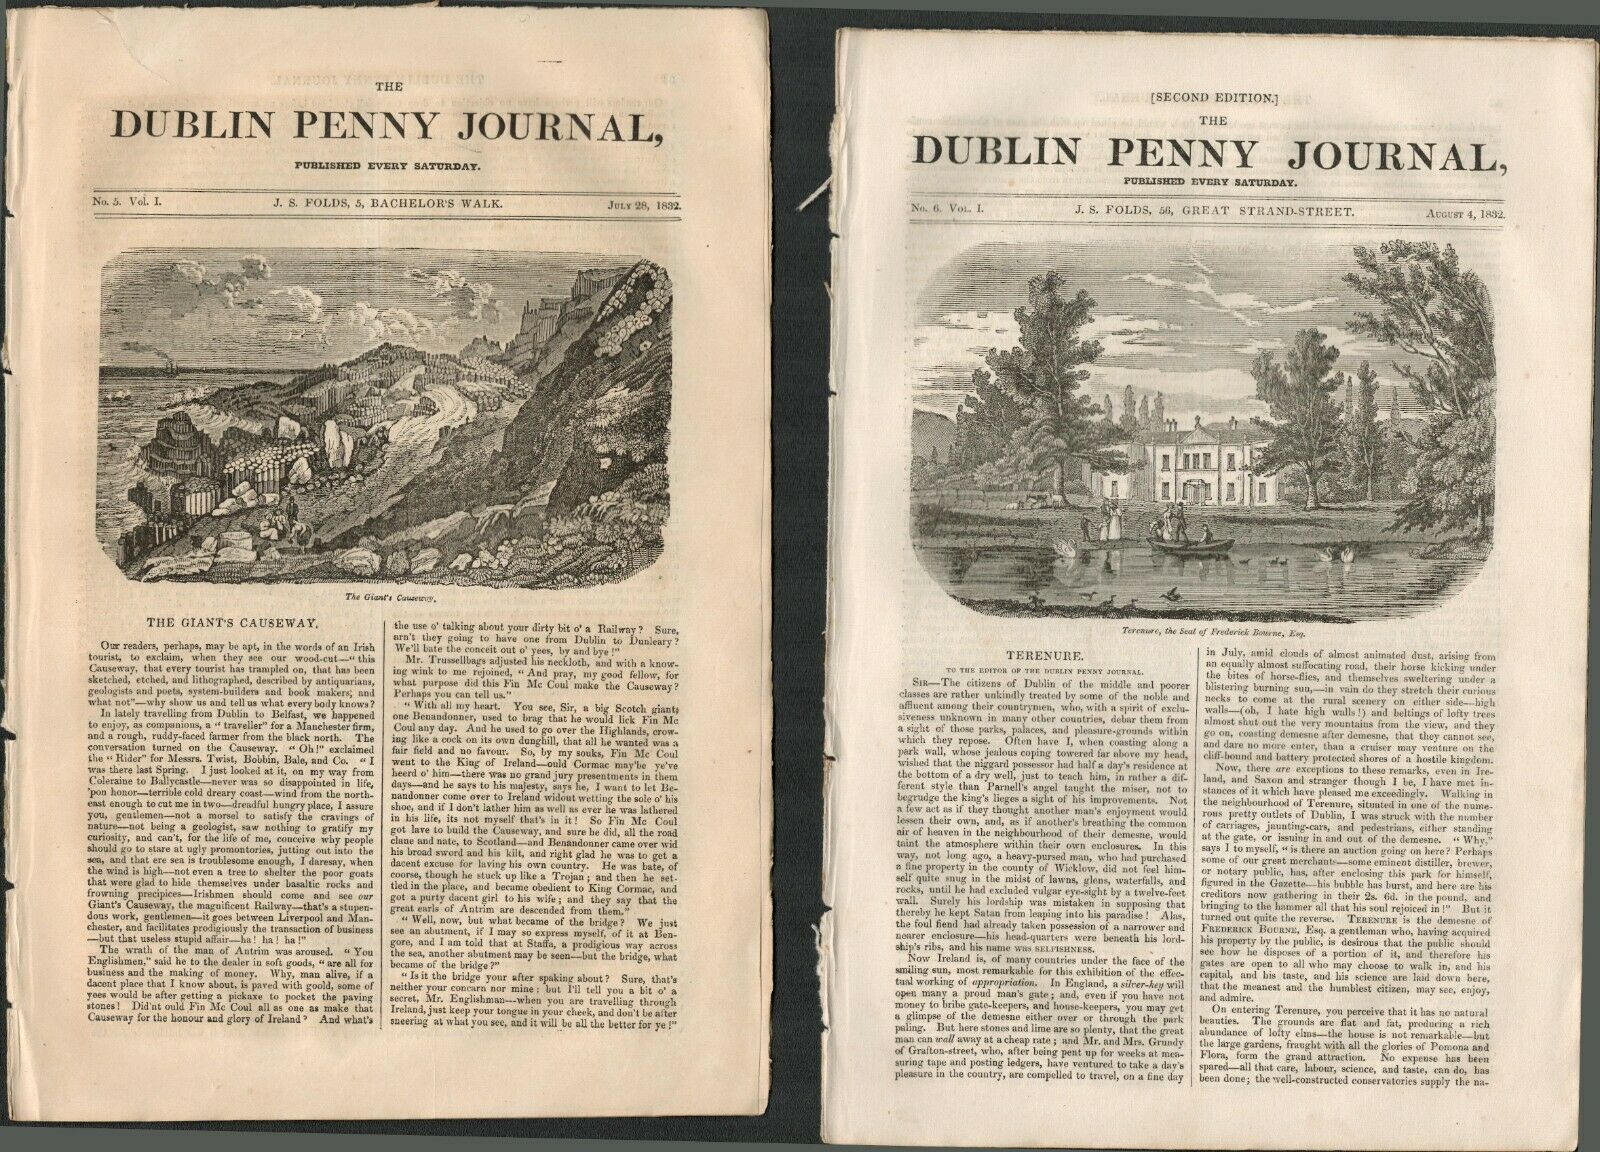 2 Antique Editions 1832 Dublin Penny Journal 14 Giant Causeway